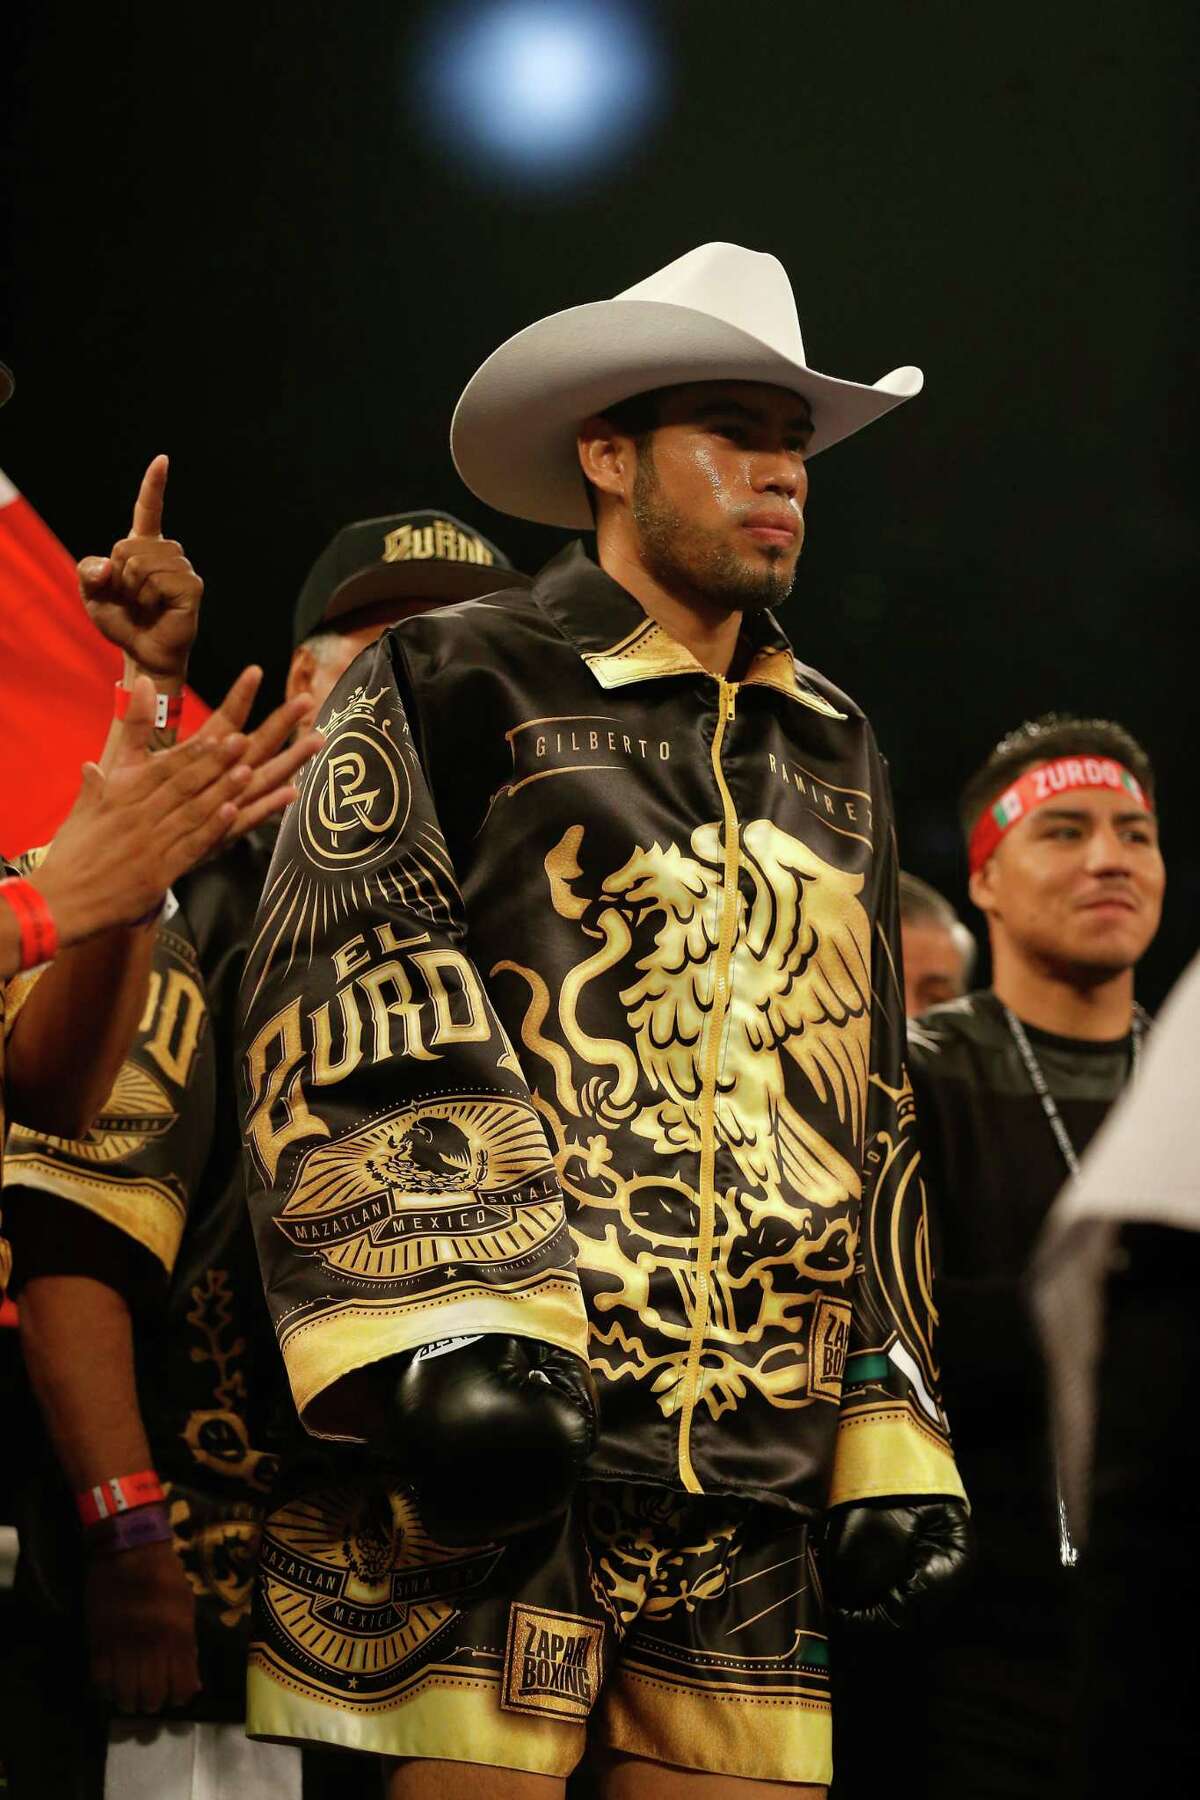 Gilberto Ramirez is introduced before his WBO super middleweight championship fight against Arthur Abraham on April 9, 2016 at MGM Grand Garden Arena in Las Vegas.